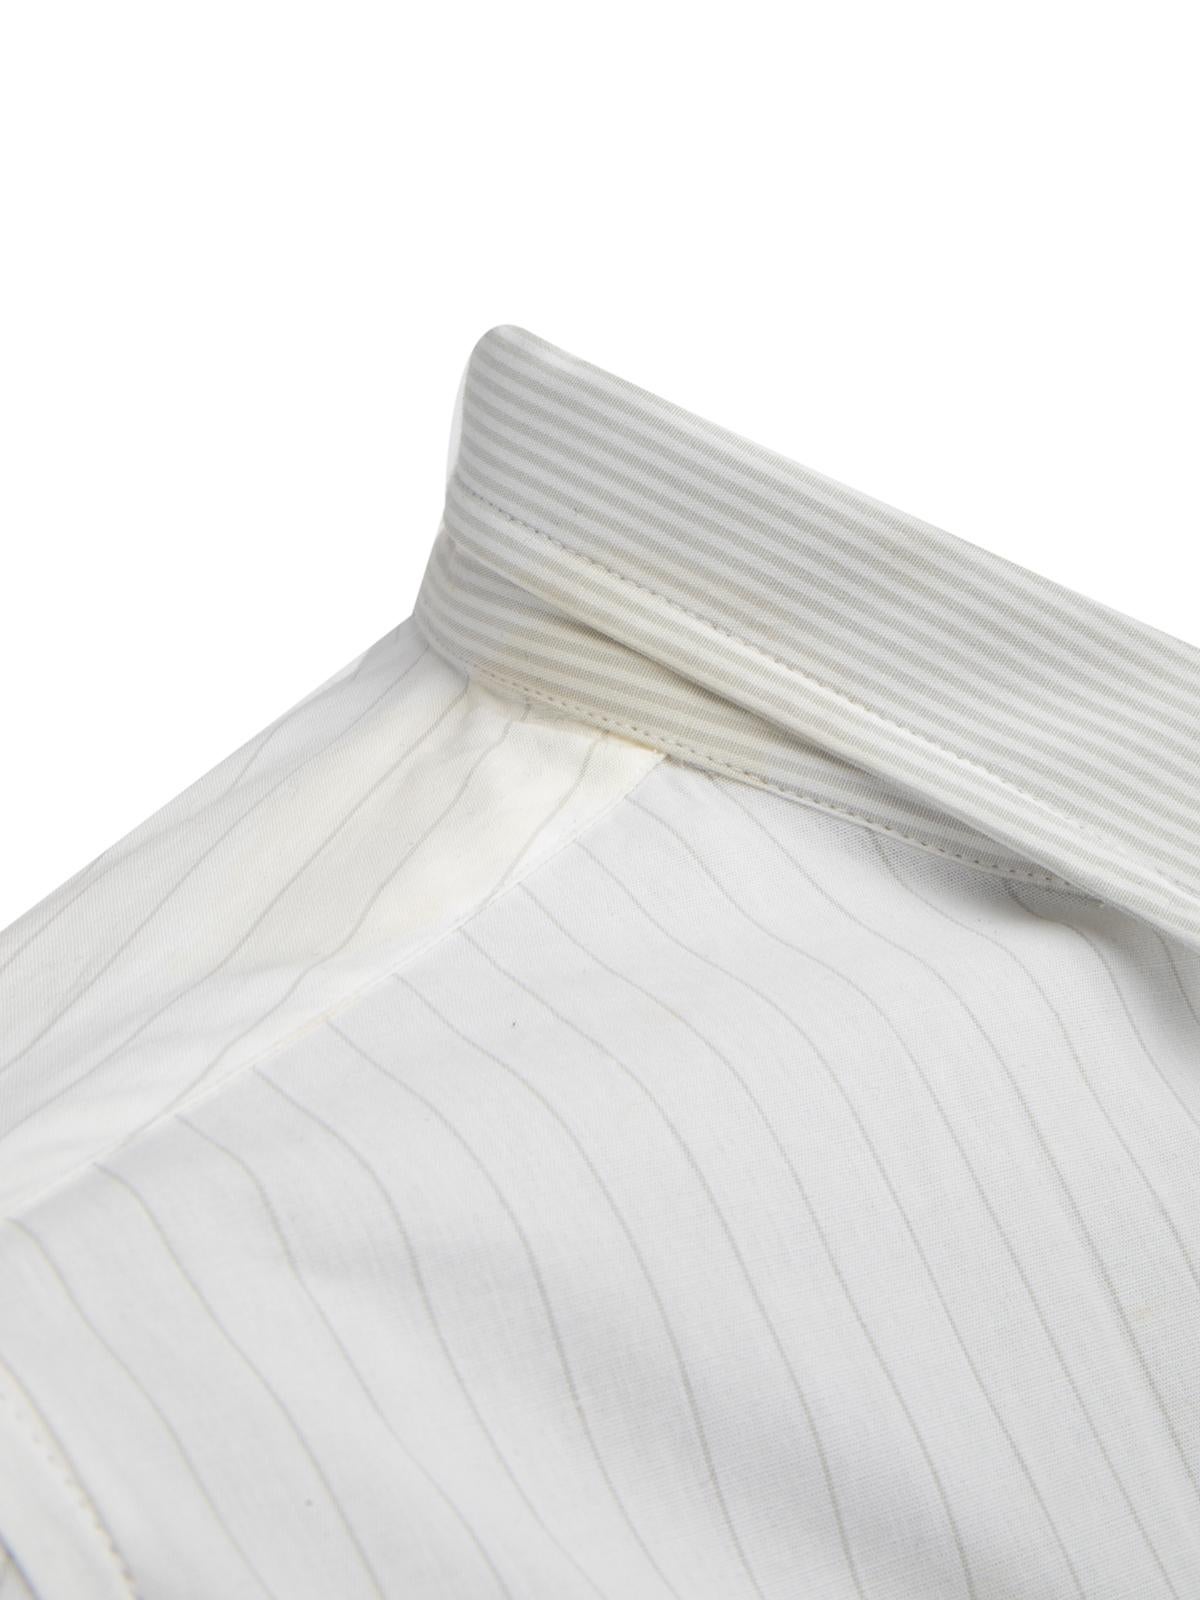 Pre-Loved Dolce & Gabbana Women's White Striped Cotton Shirt with Detachable For Sale 2